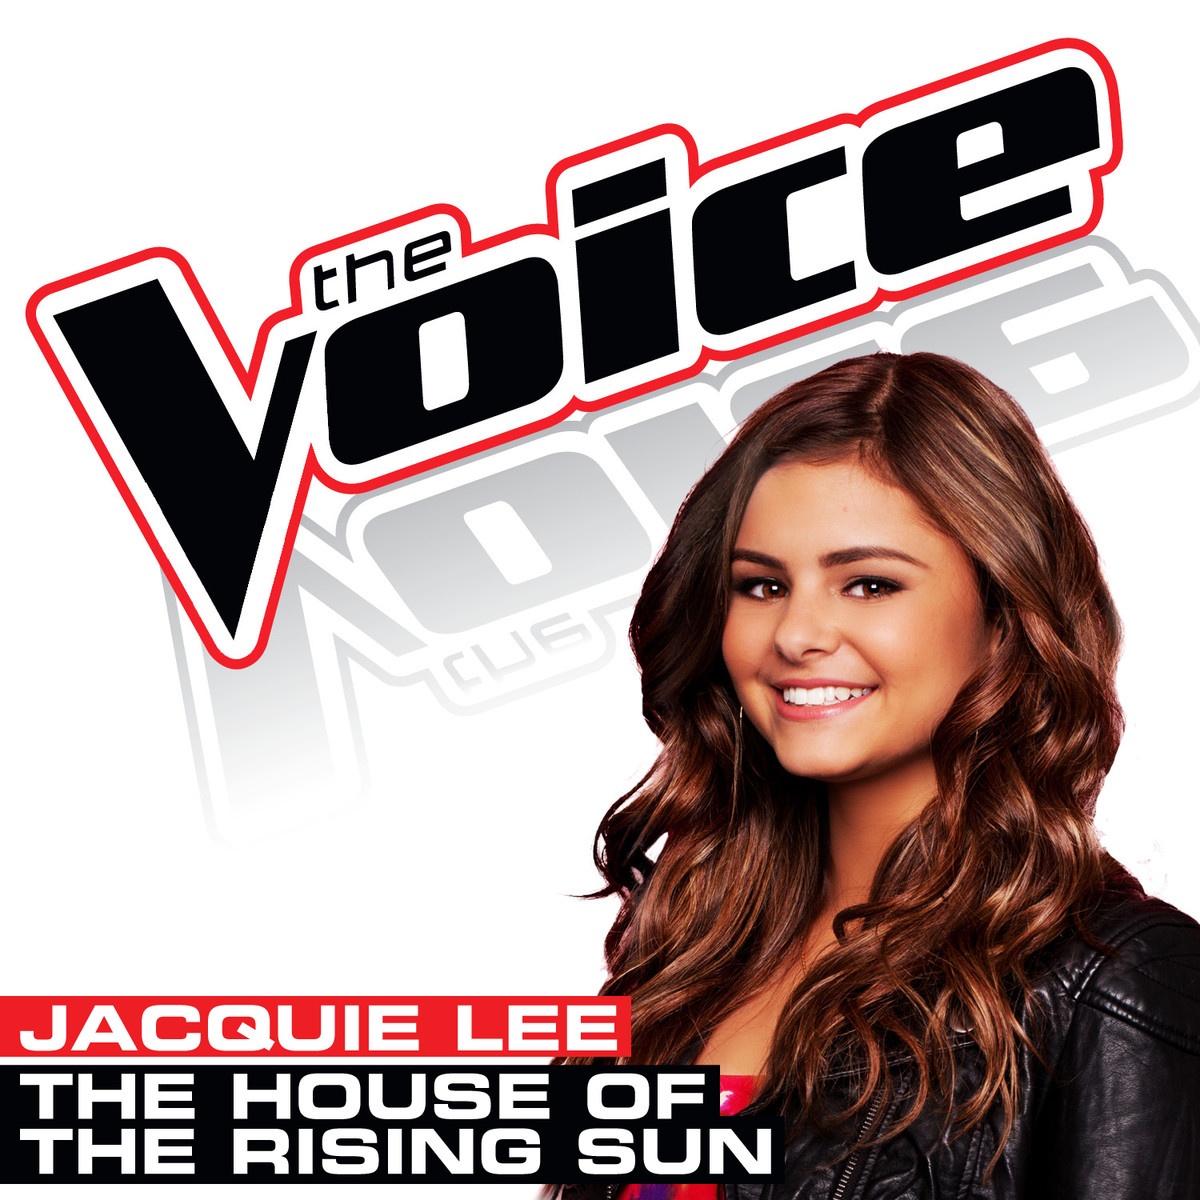 The House of the Rising Sun (The Voice Performance)